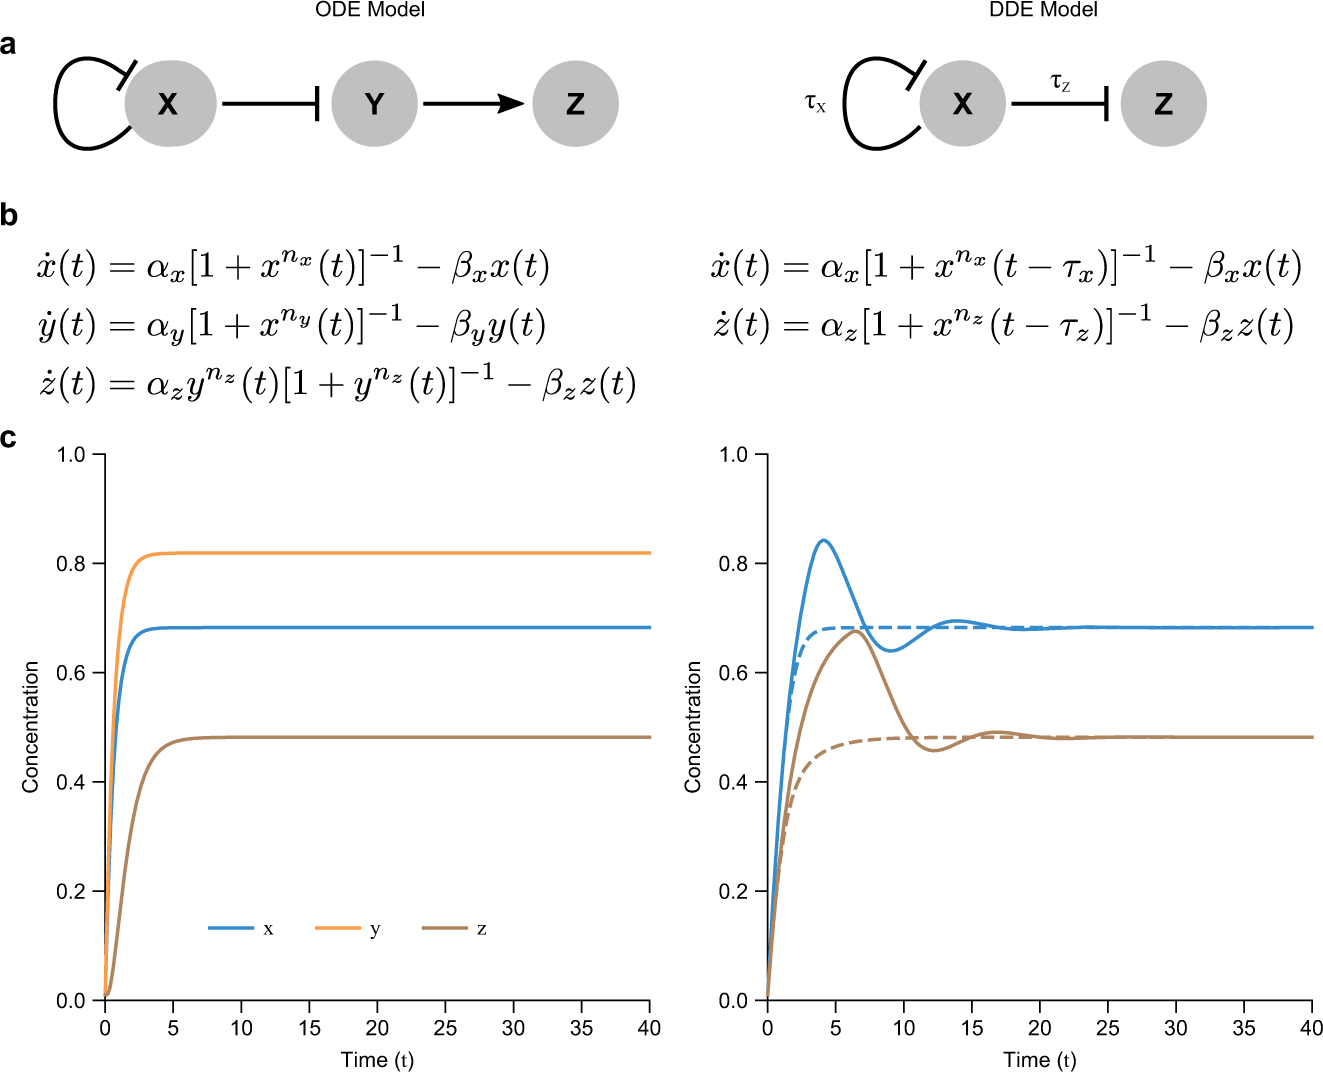 Nonlinear delay equations their application modeling biological network motifs | Communications